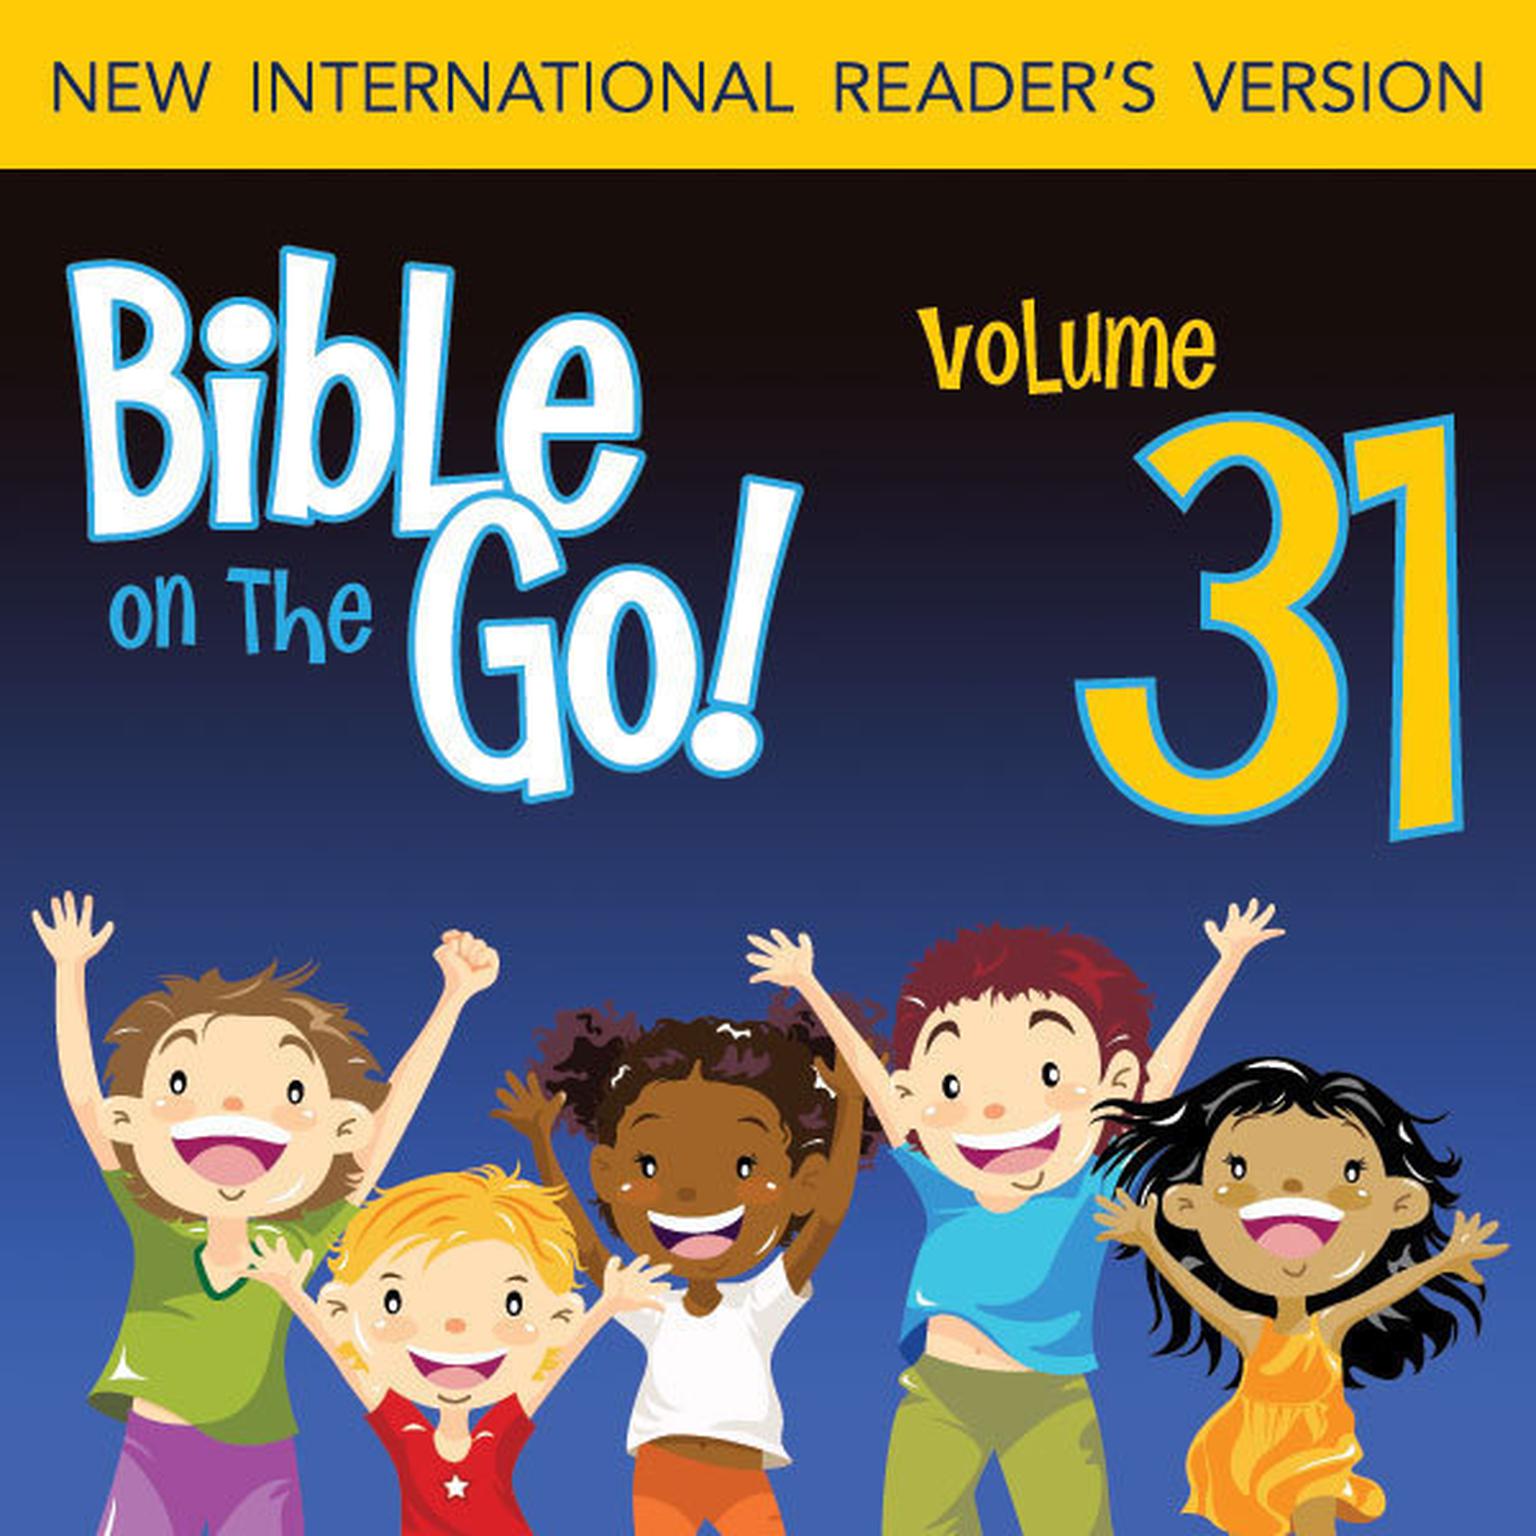 Bible on the Go Audio Bible - New International Readers Version, NIrV: Vol. 31 Words from the Prophet Isaiah, Part 2; The Lord Chooses Jeremiah (Isaiah 52, 60, 63; Jeremiah 1, 24; Ezekiel 30) Audiobook, by Zondervan